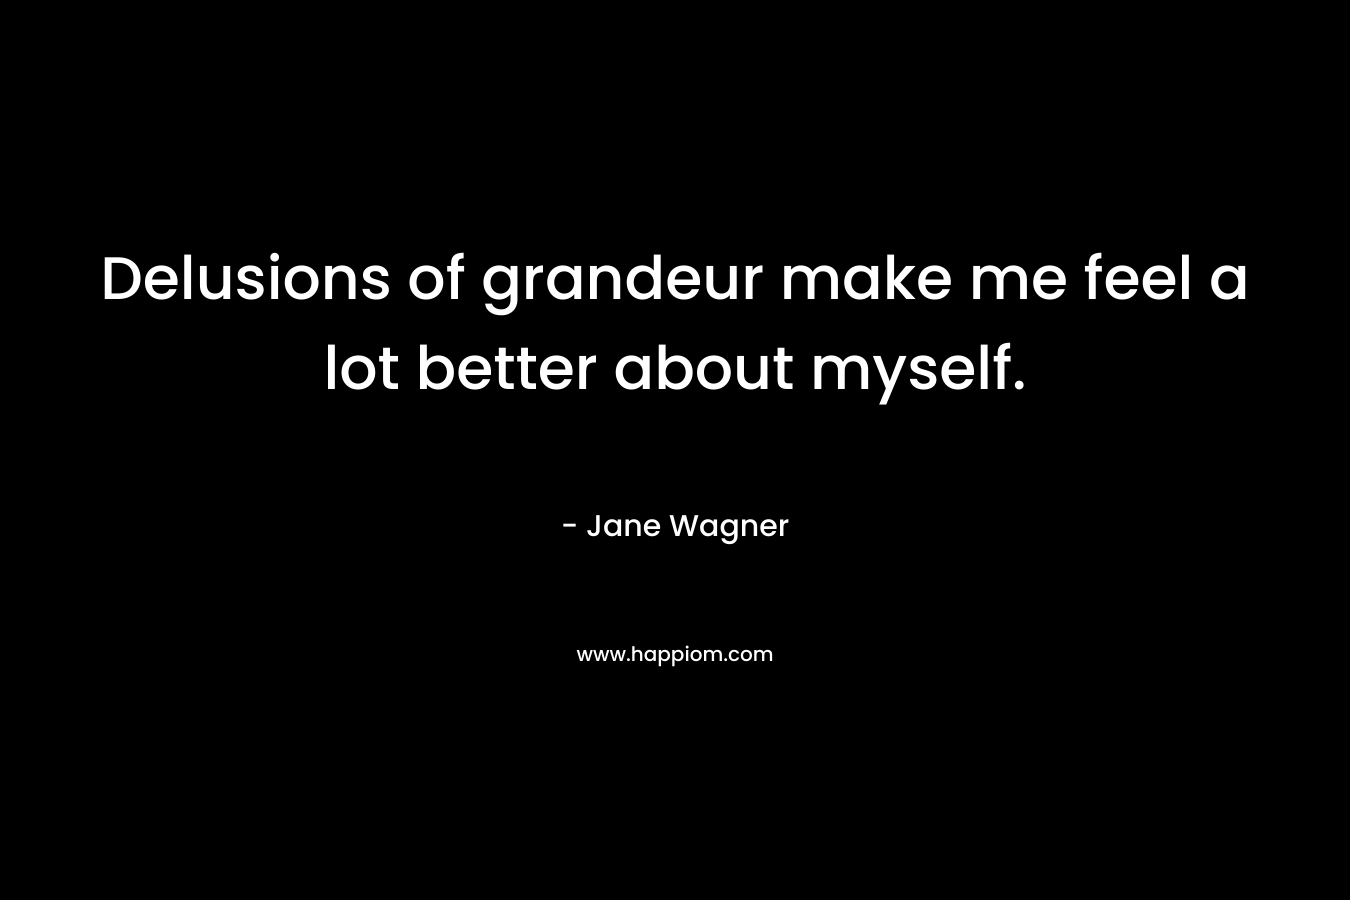 Delusions of grandeur make me feel a lot better about myself. – Jane Wagner